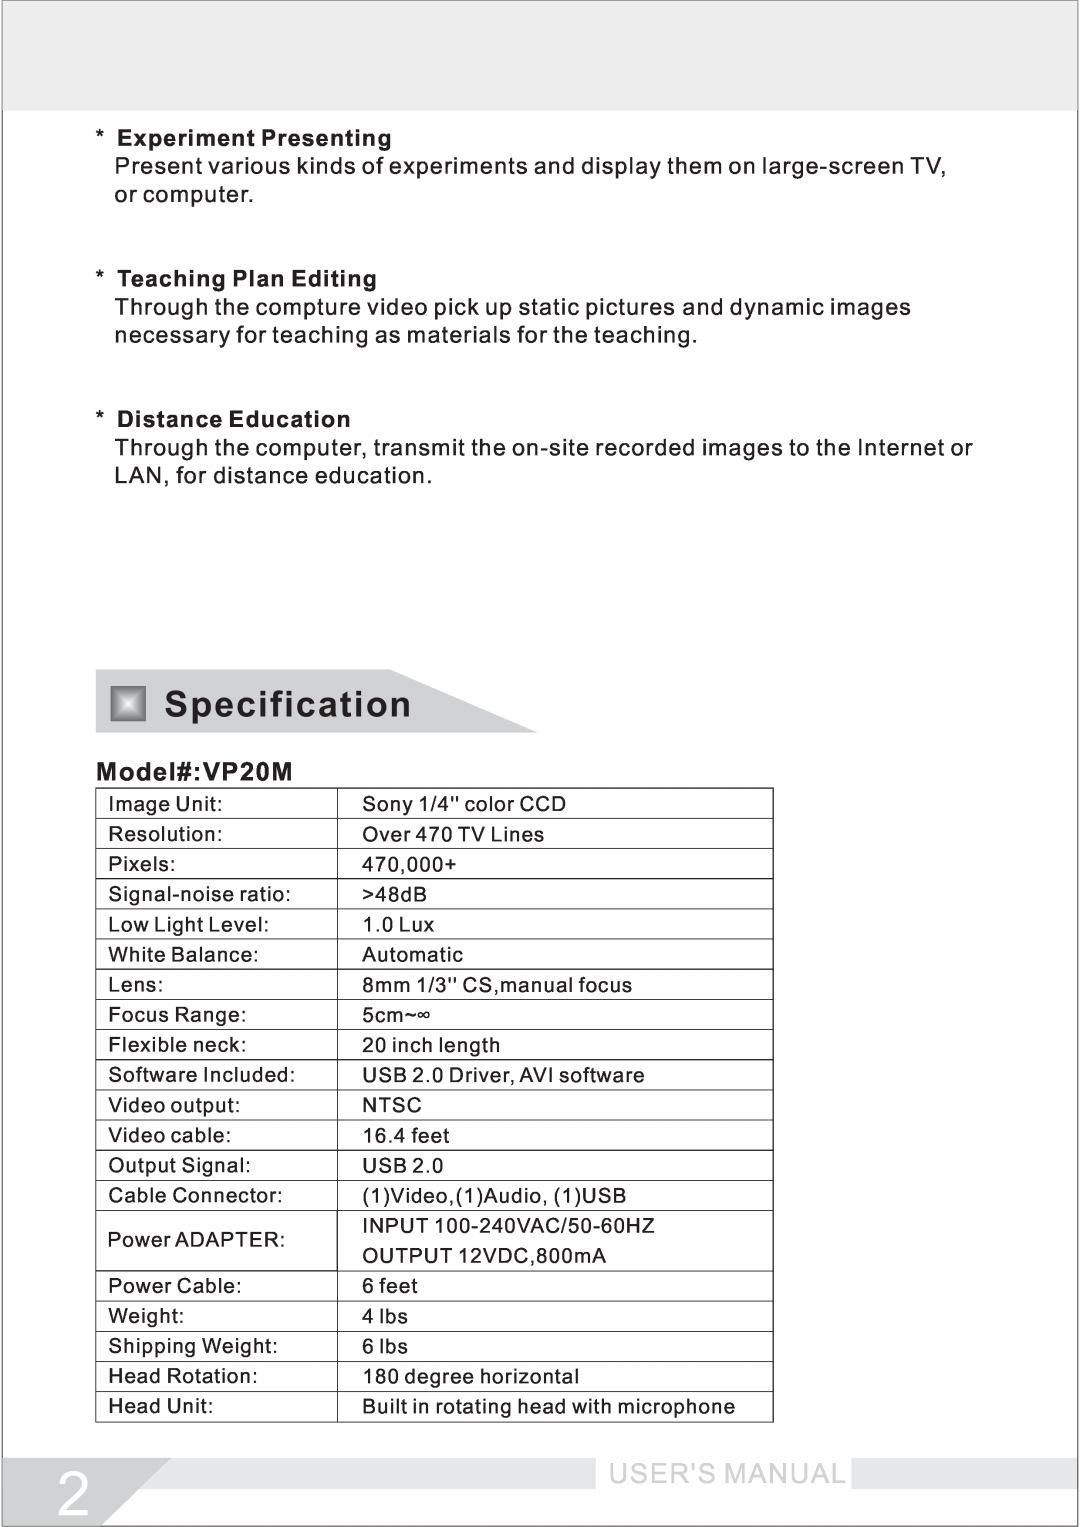 Buhl manual Specification, Model# VP20M, Experiment Presenting, Teaching Plan Editing, Distance Education 